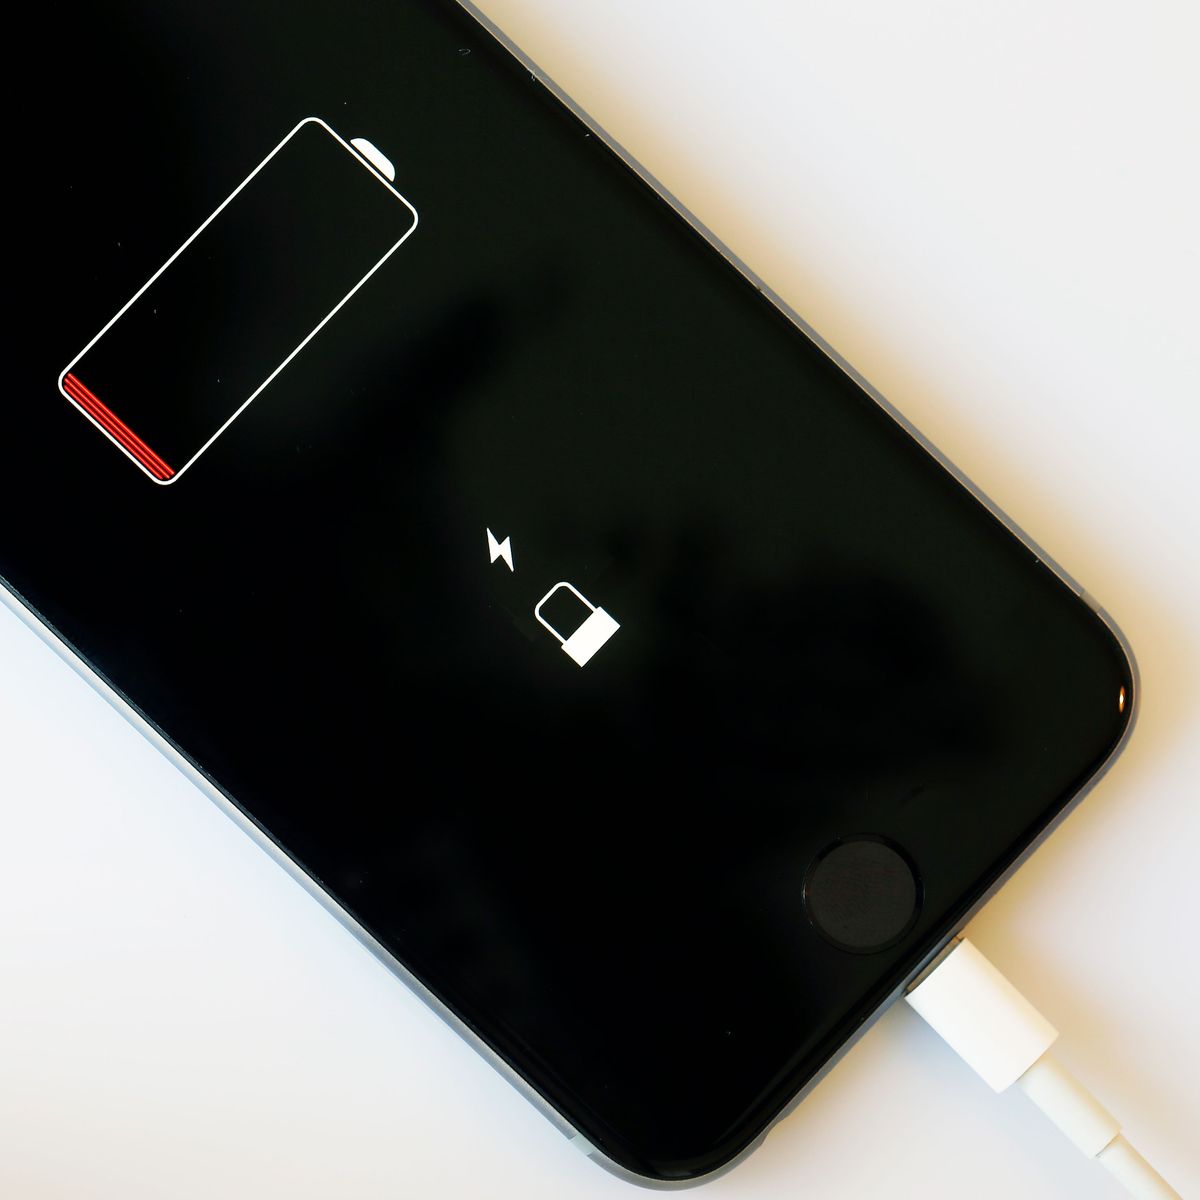 How to Save Battery Life for Your Smartphone